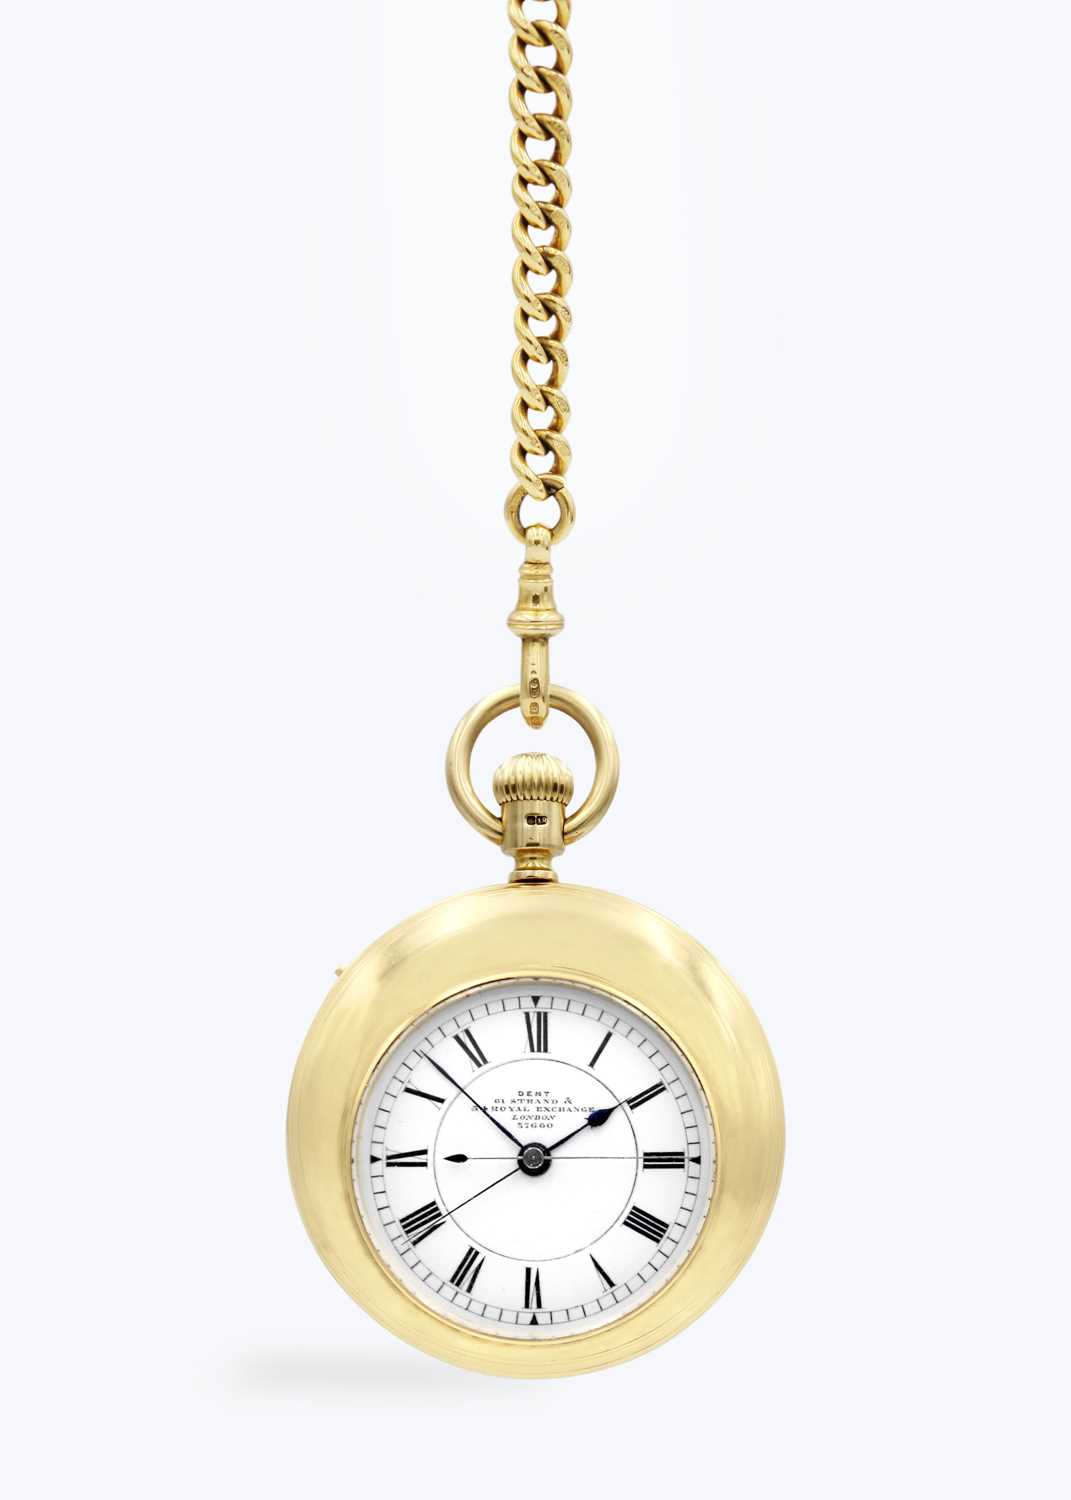 DENT - An unusual 18ct cased chronograph crown wind open face pocket watch, no. 37660. - Image 2 of 12